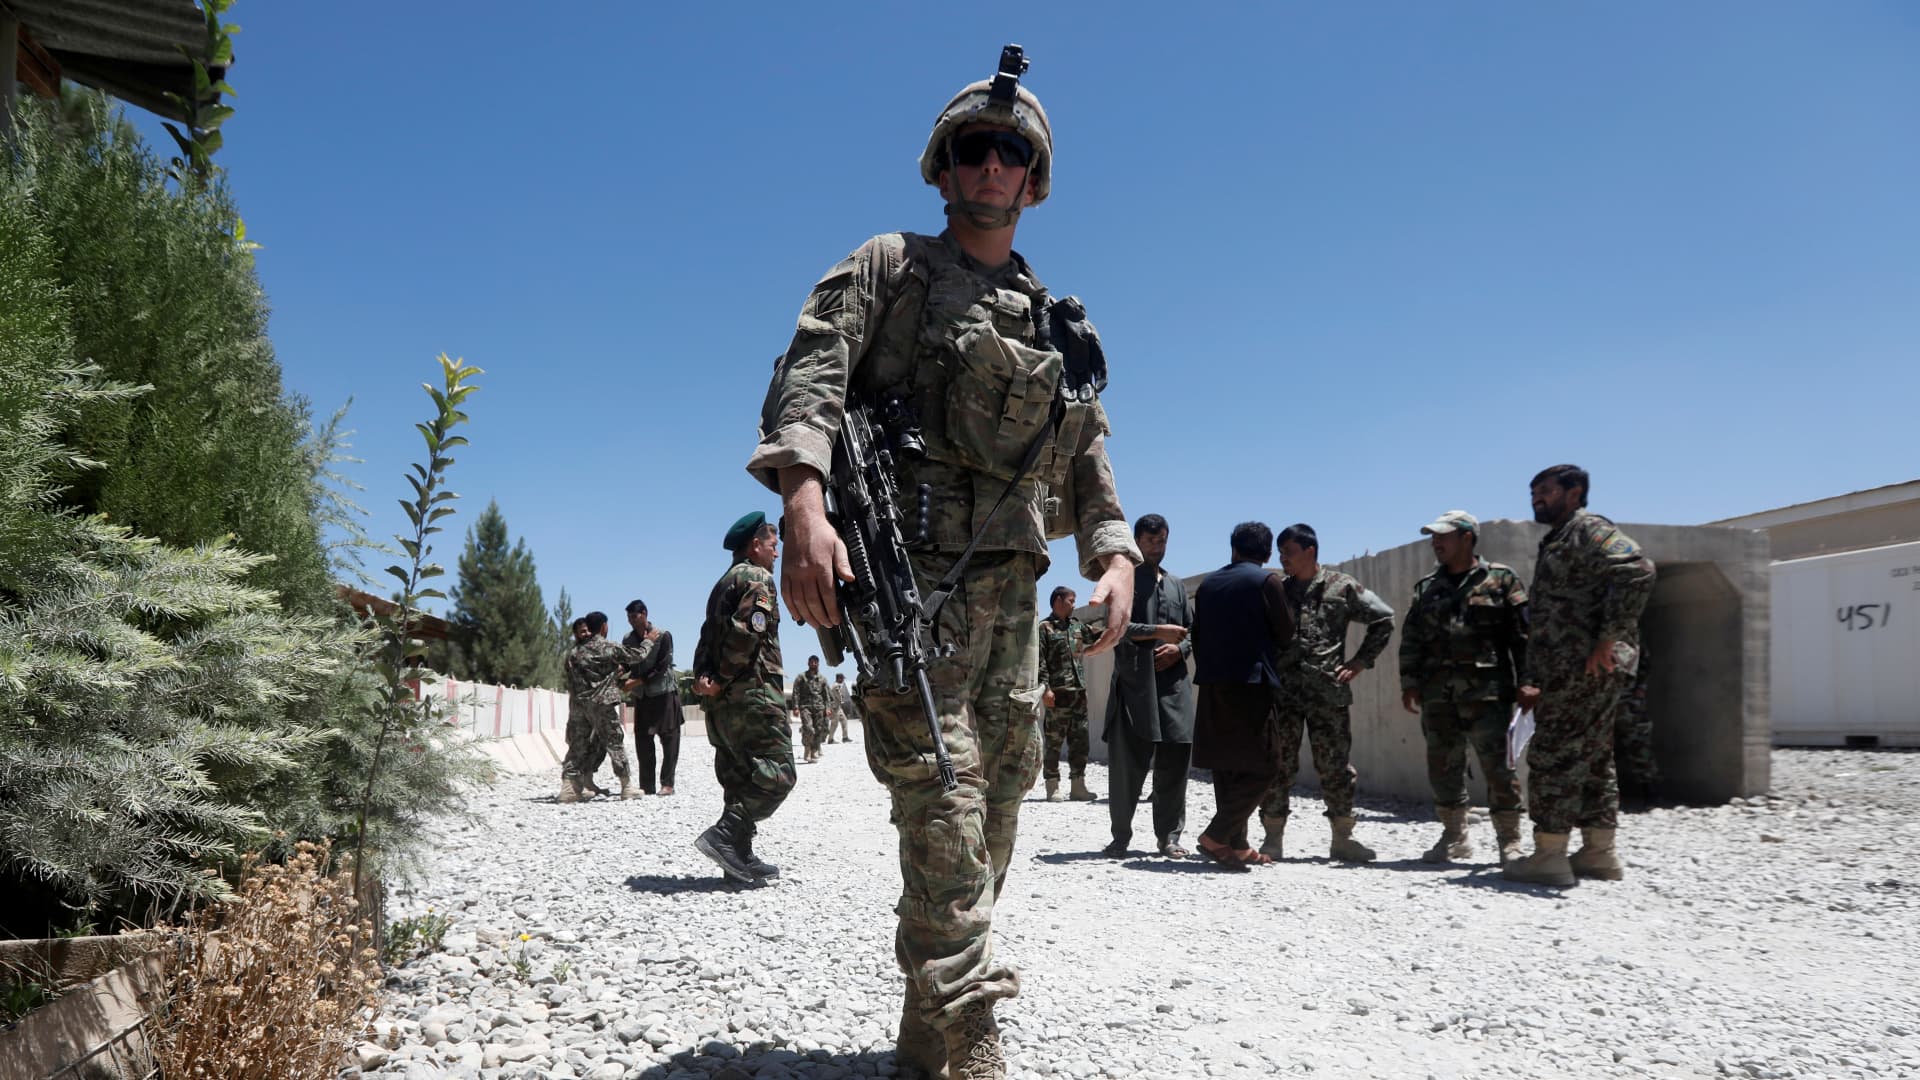 A U.S. soldier keeps watch at an Afghan National Army (ANA) base in Logar province, Afghanistan August 5, 2018